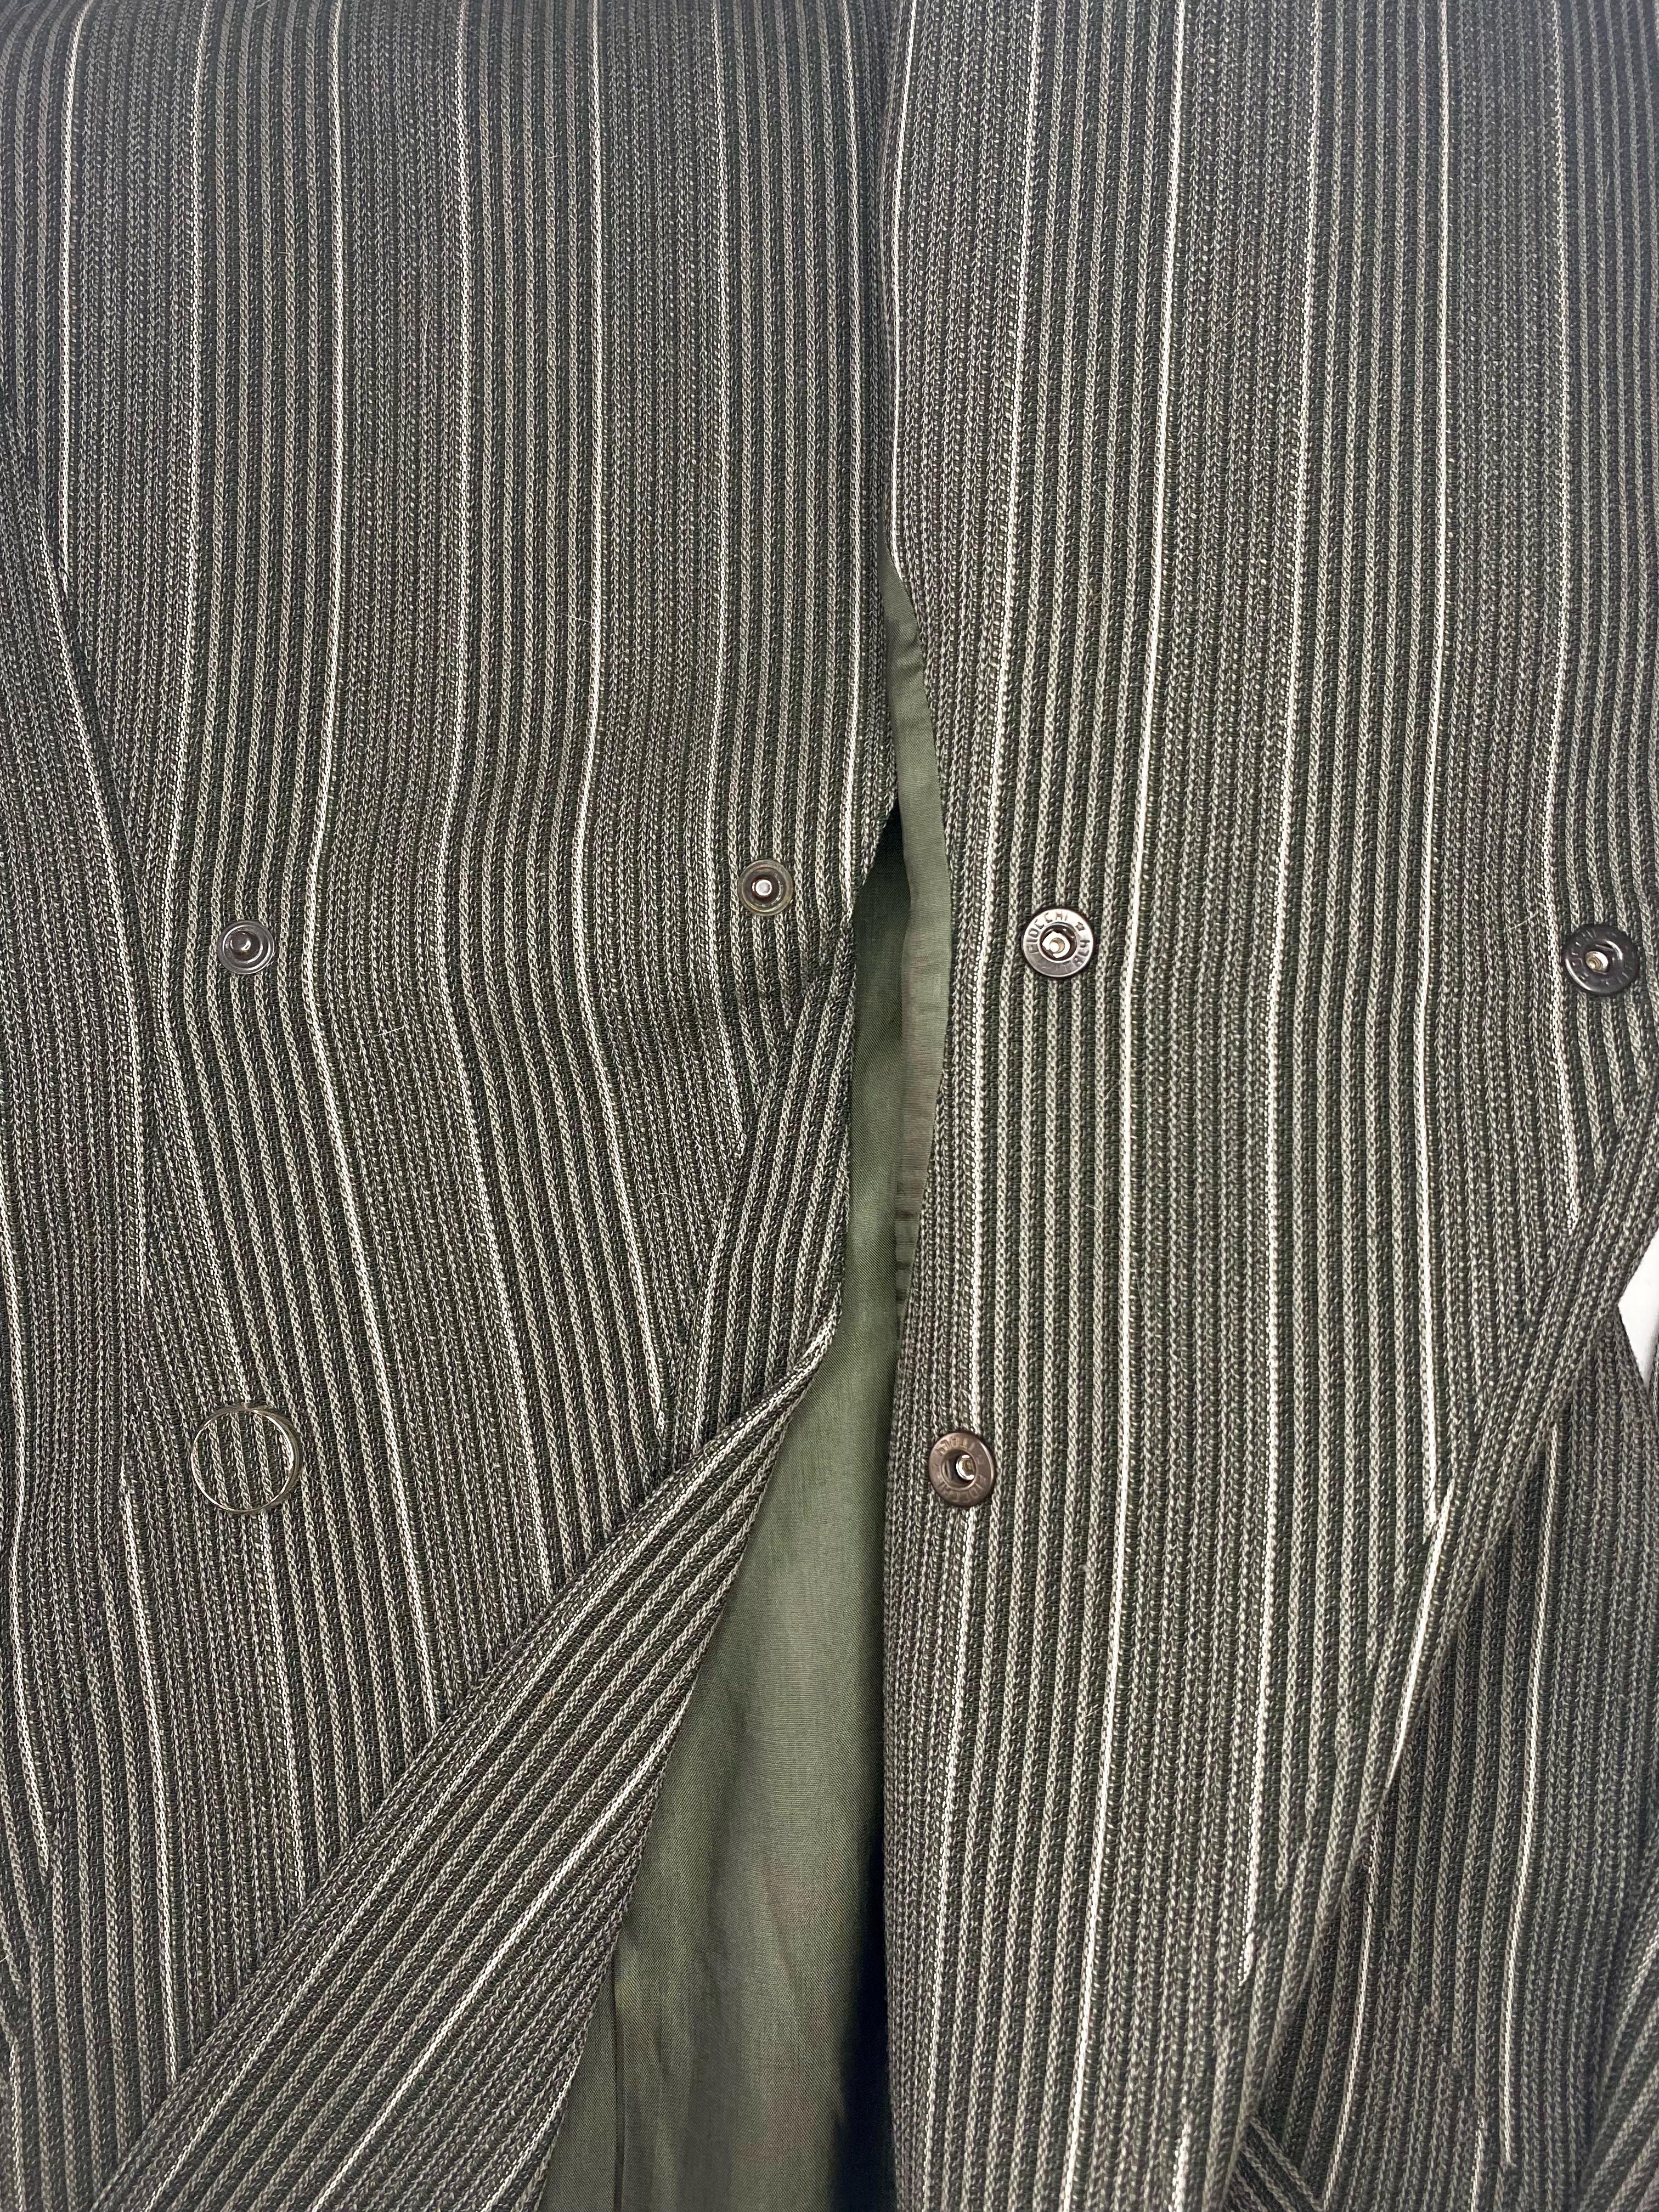 Gray F/W 1998 Thierry Mugler Structural Green Grey Wool Striped Hourglass Pant Suit  For Sale